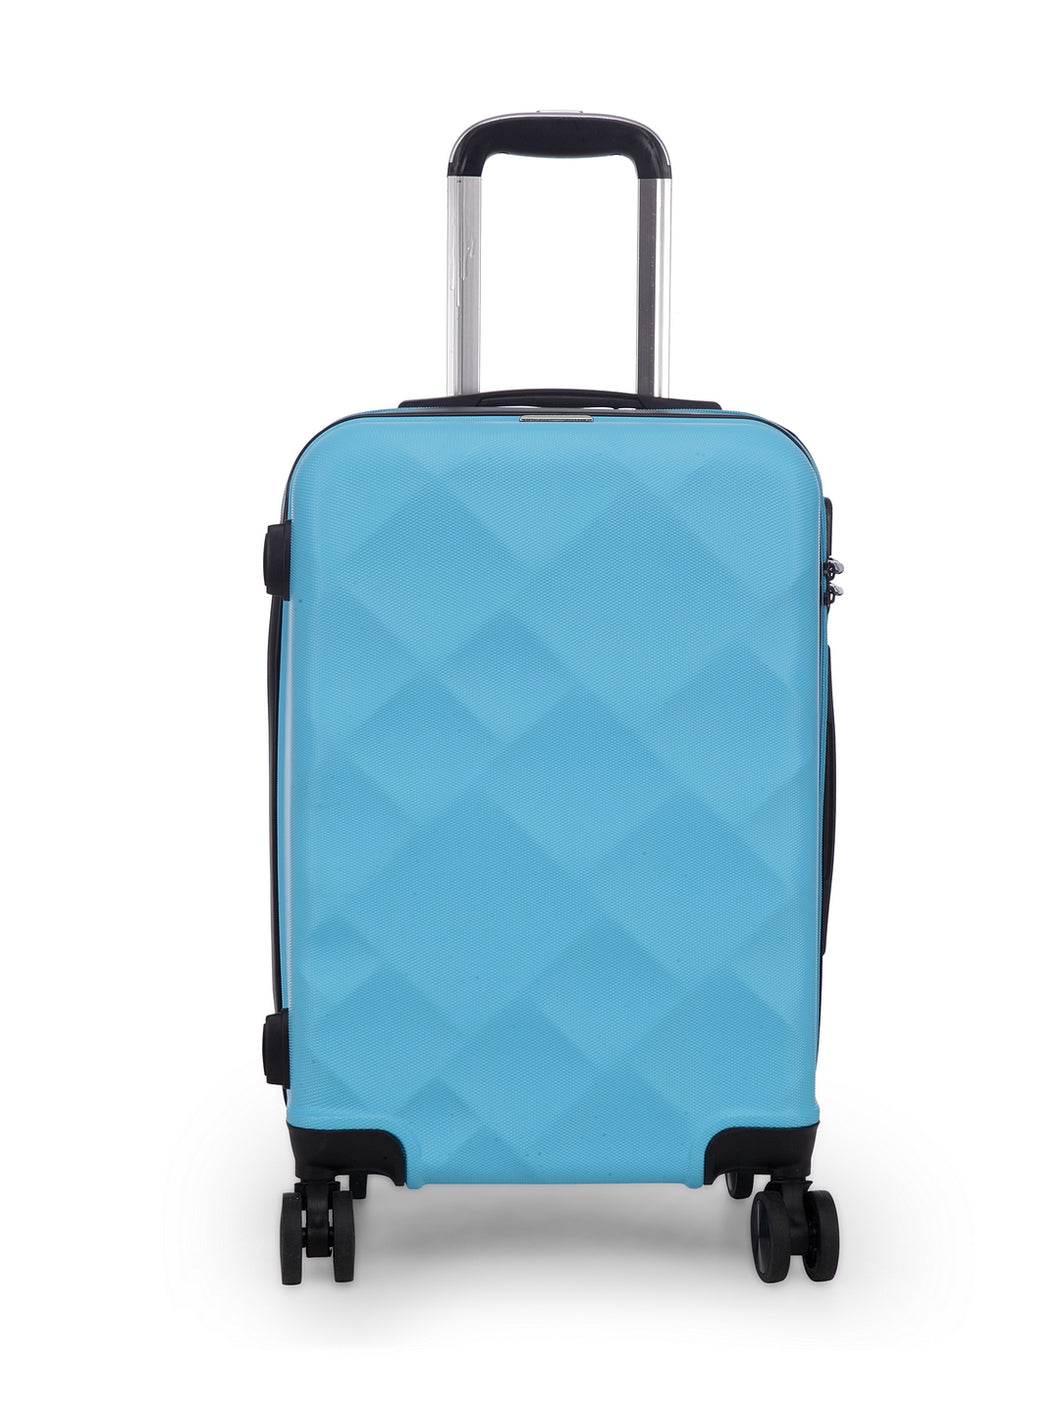 Unisex Blue Textured Hard-Sided Cabin Trolley Suitcase